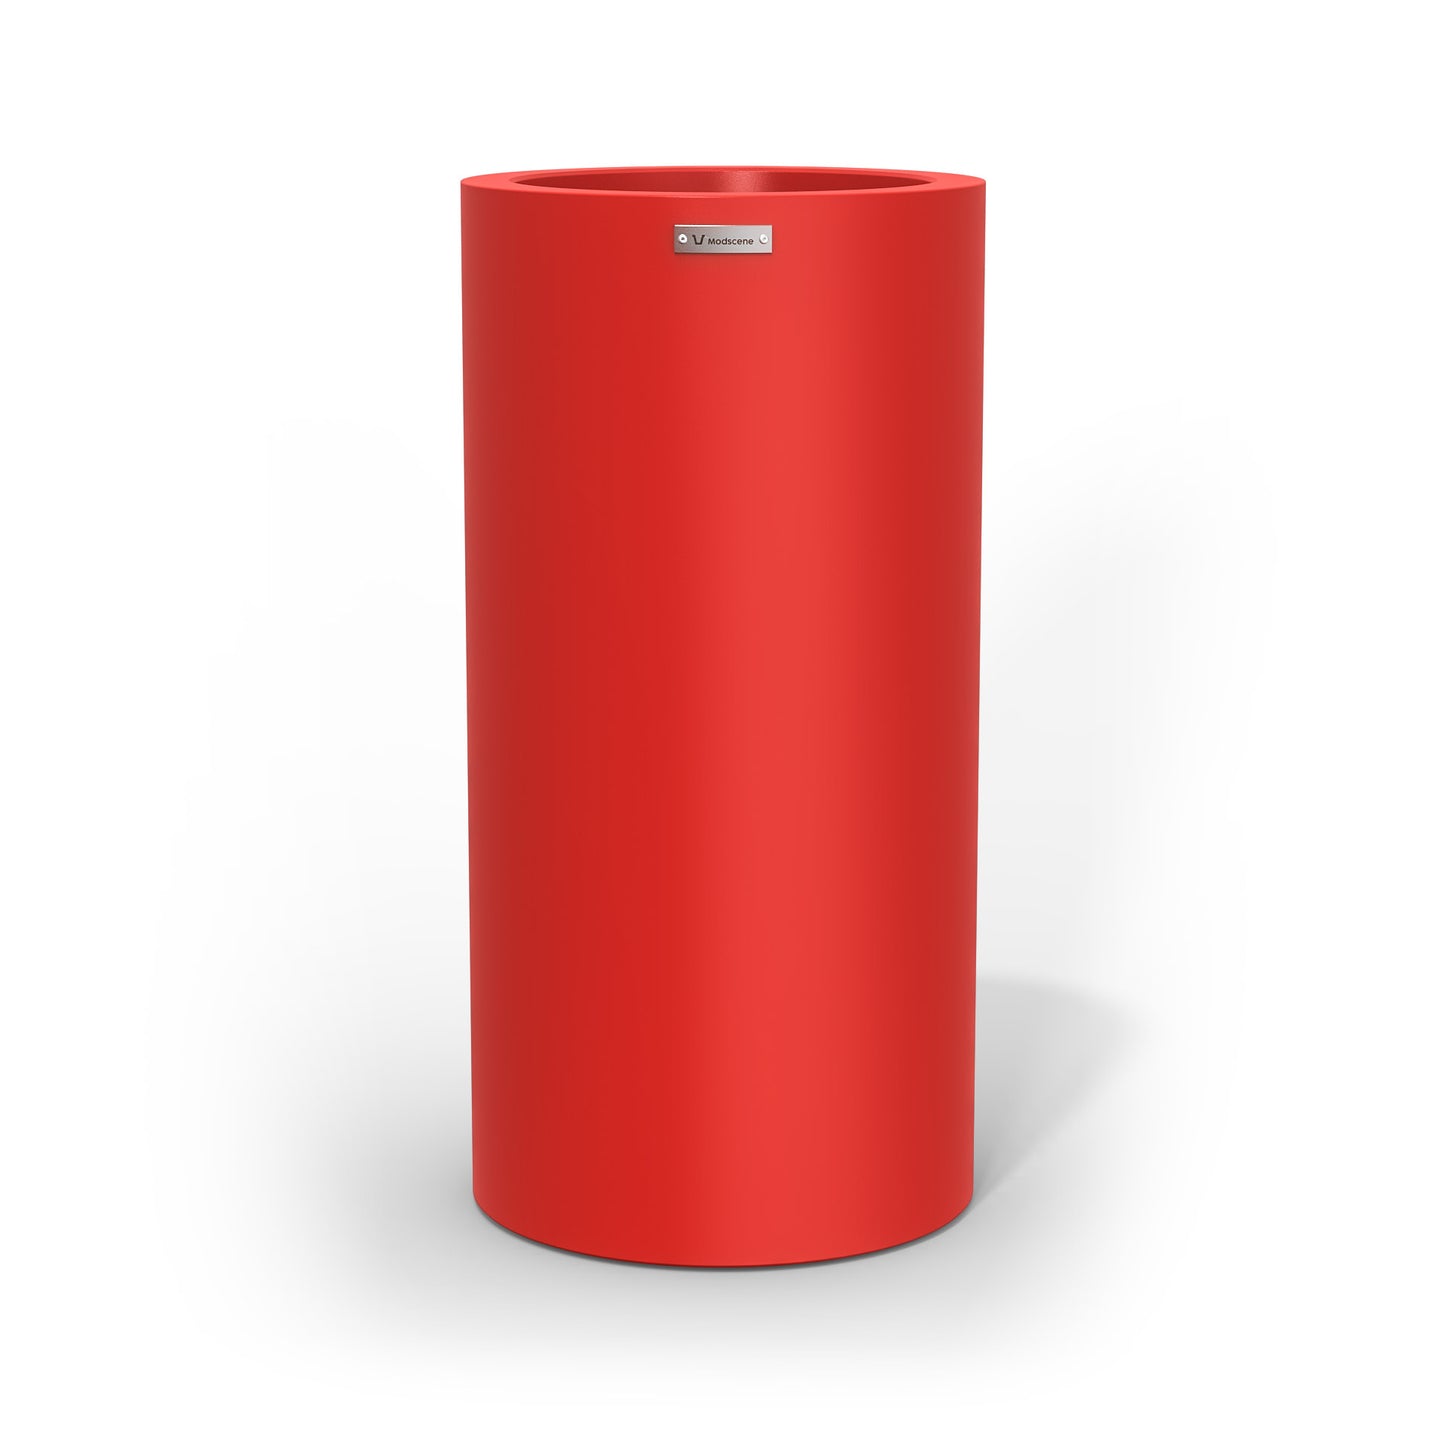 A large cigar cylinder pot planter in red.